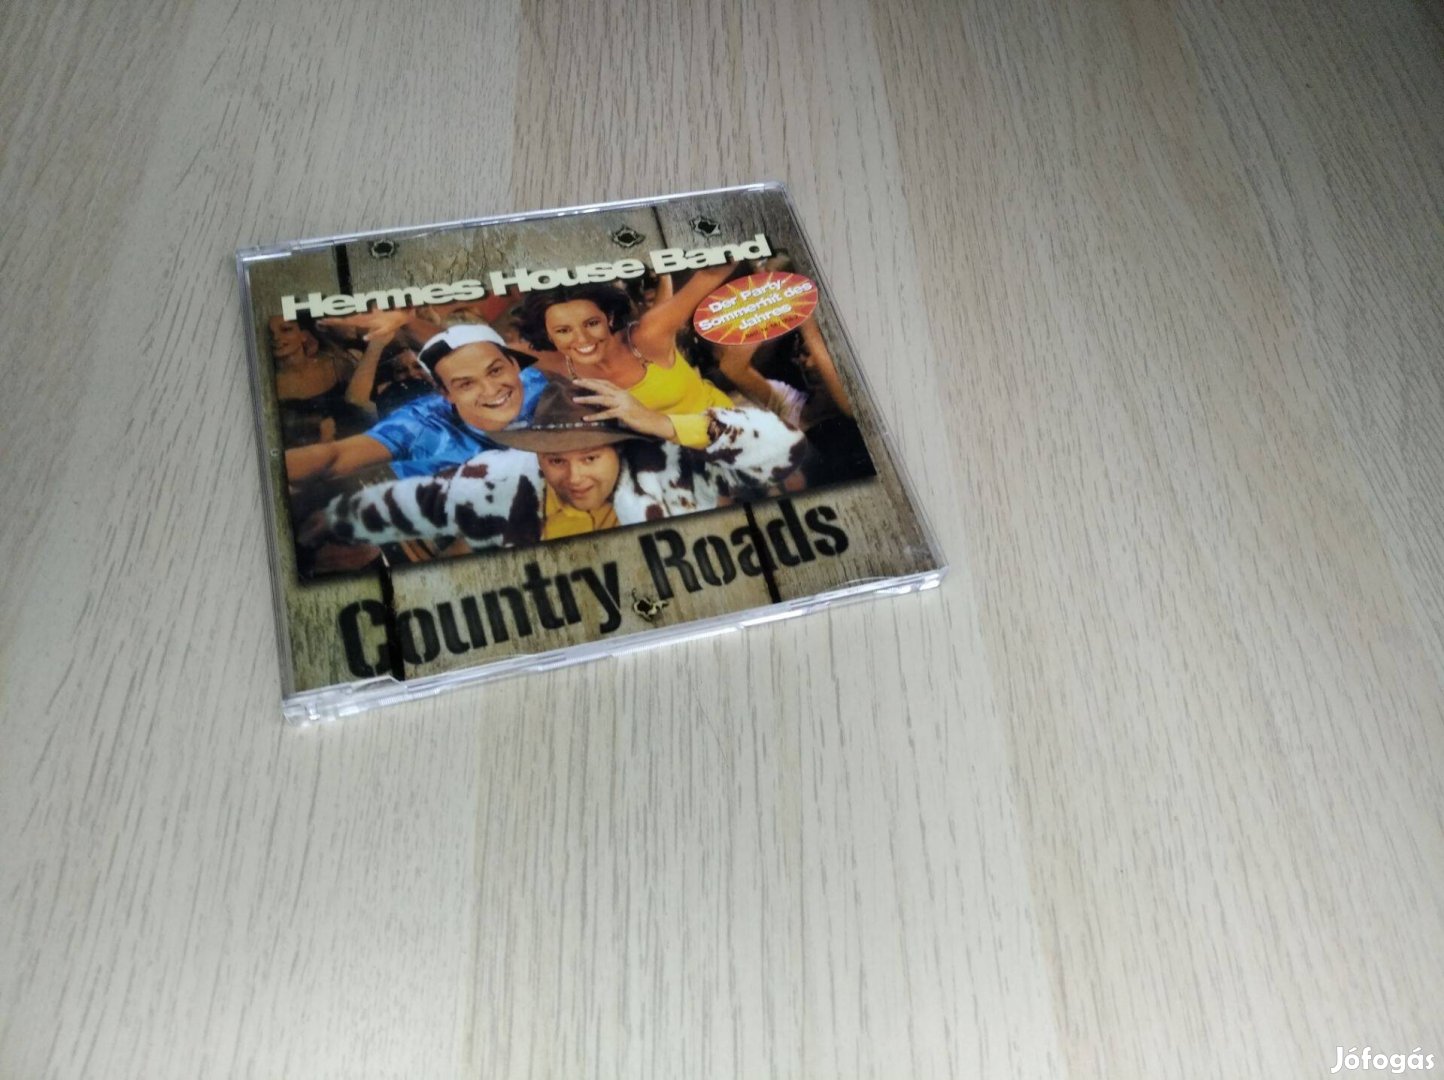 Hermes House Band - Country Roads / Maxi CD